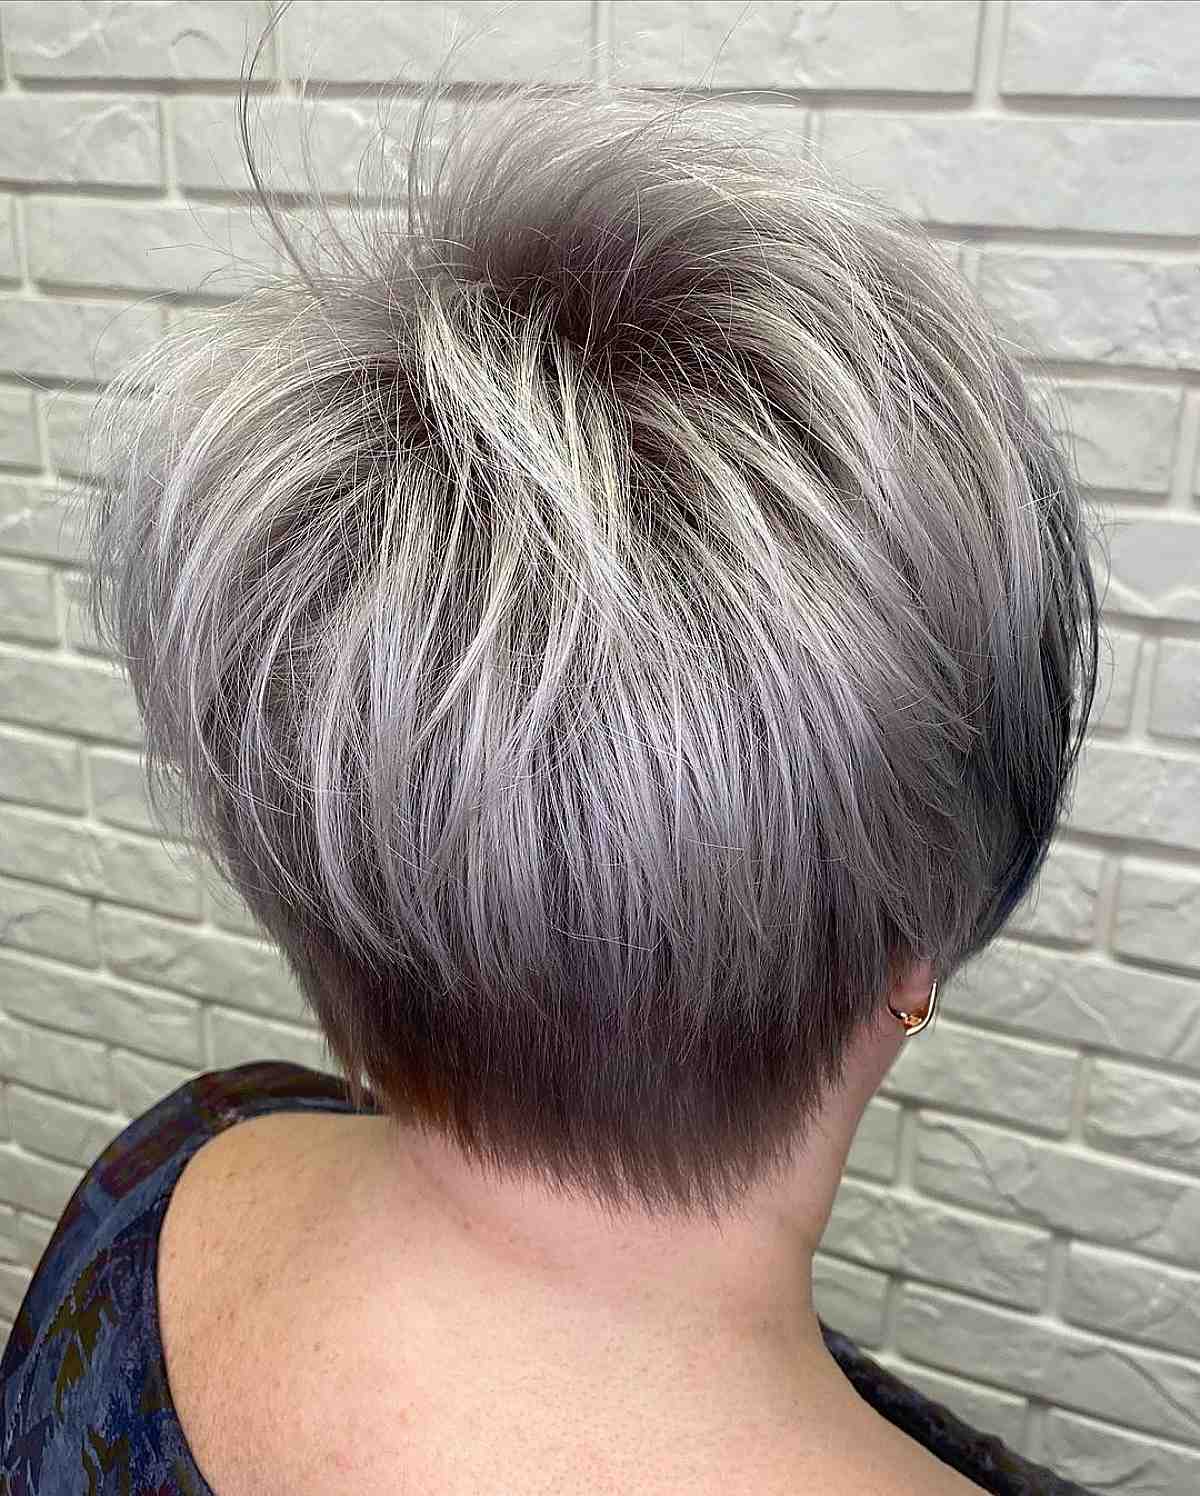 Excellent tapered pixie hairstyle